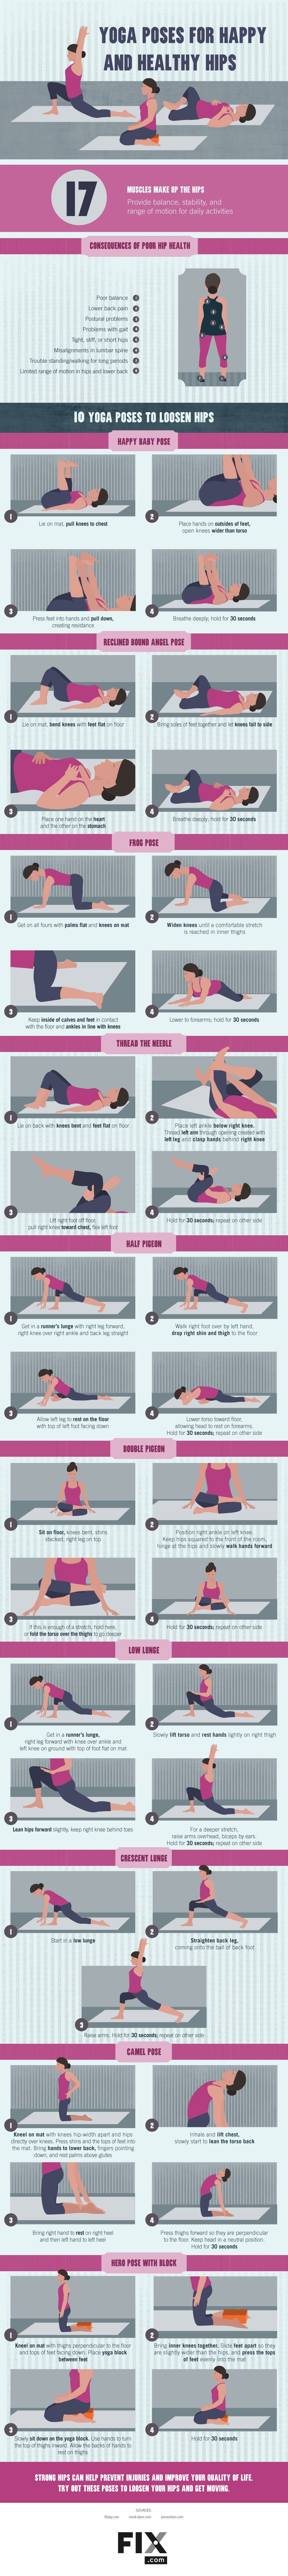 yoga-for-healthy-hips-infographic 04 21 15